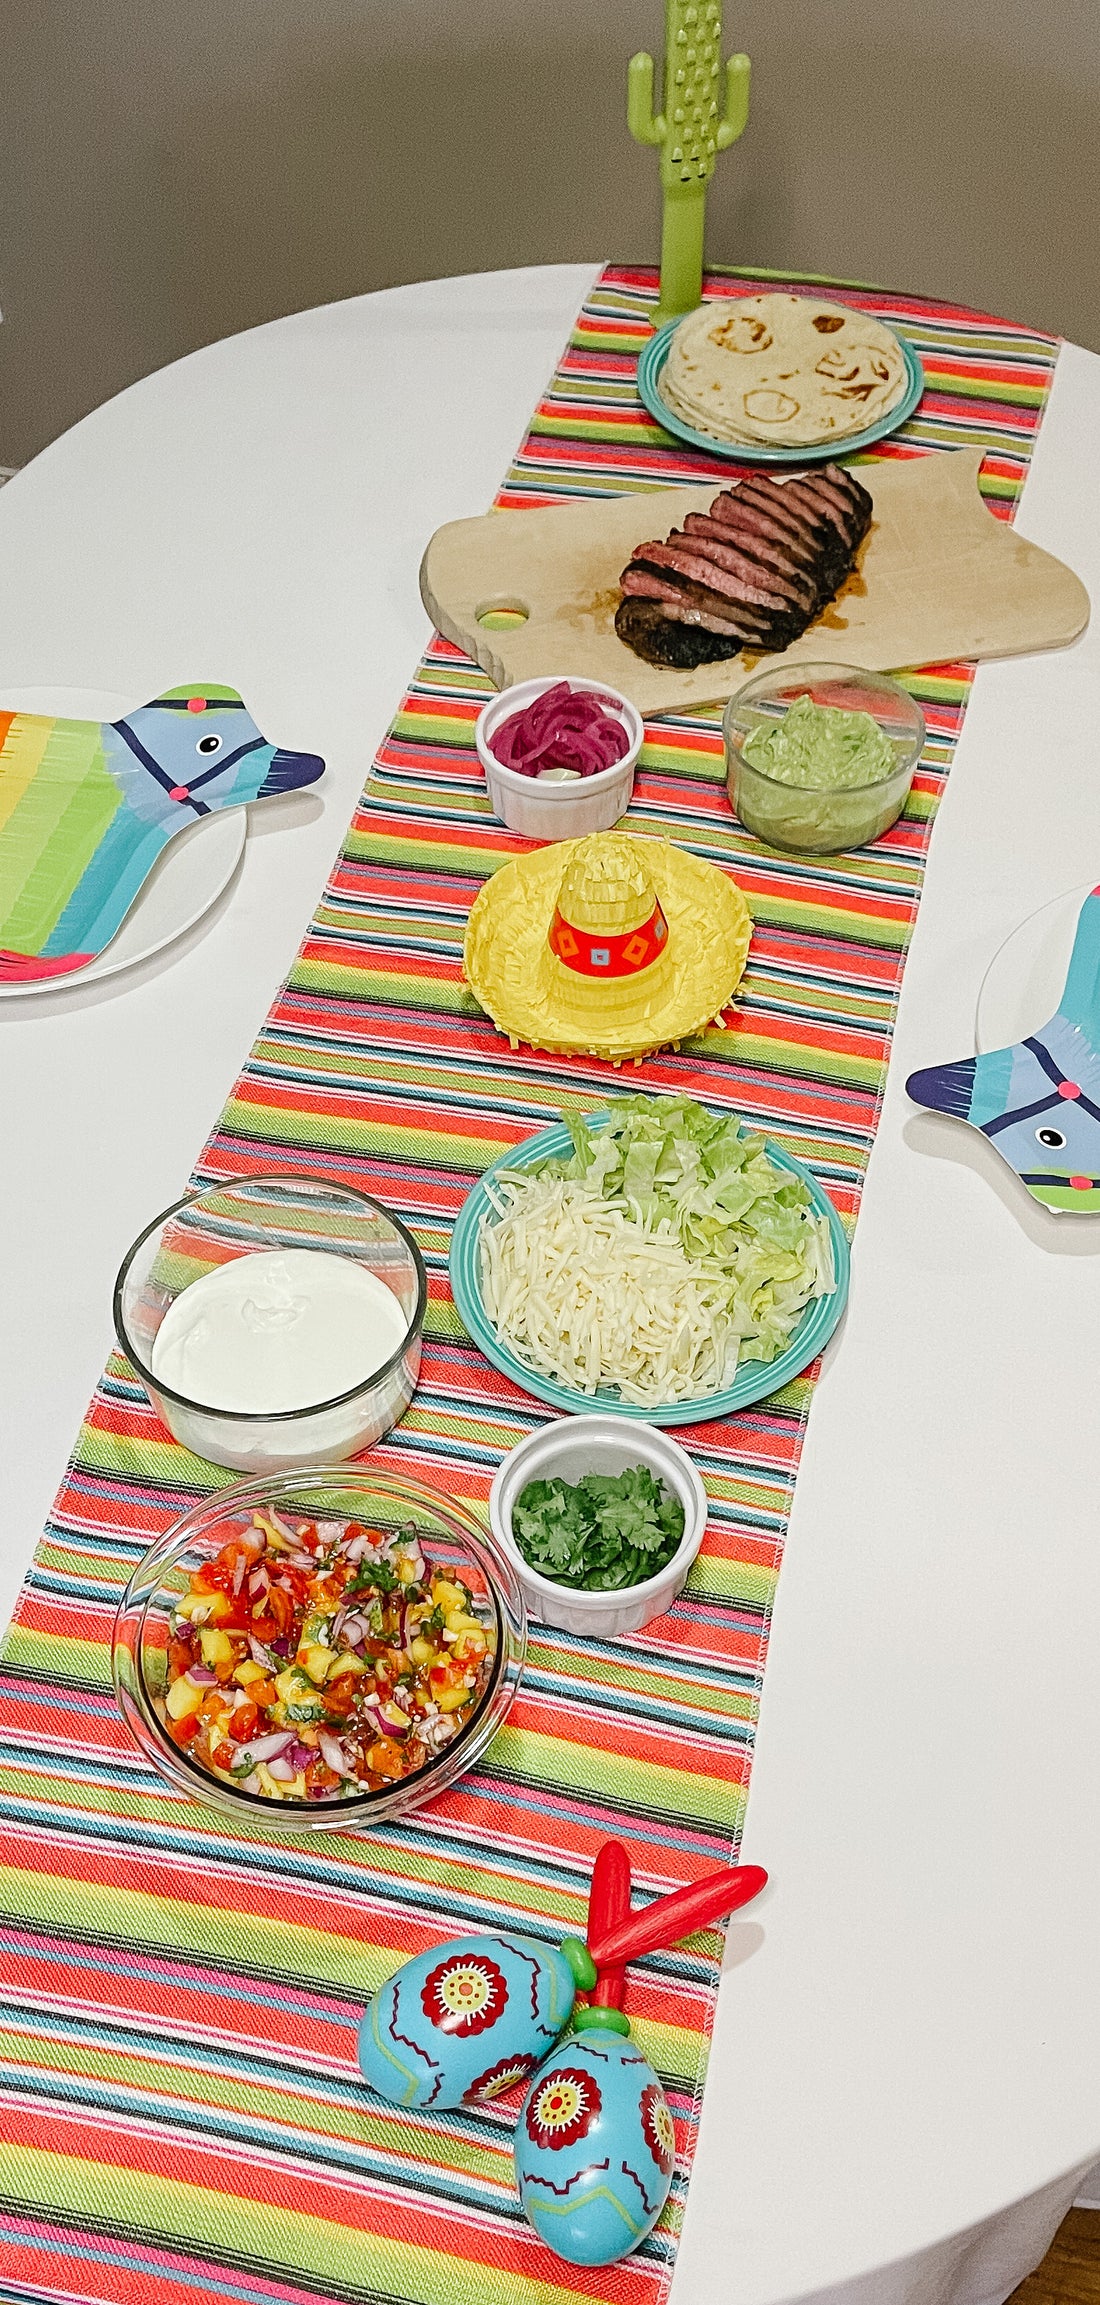 It's a Fiesta!  A Cinqo de Mayo feast on a festive table.  Carne Asada Beef, Tortillas and all the fixin's!